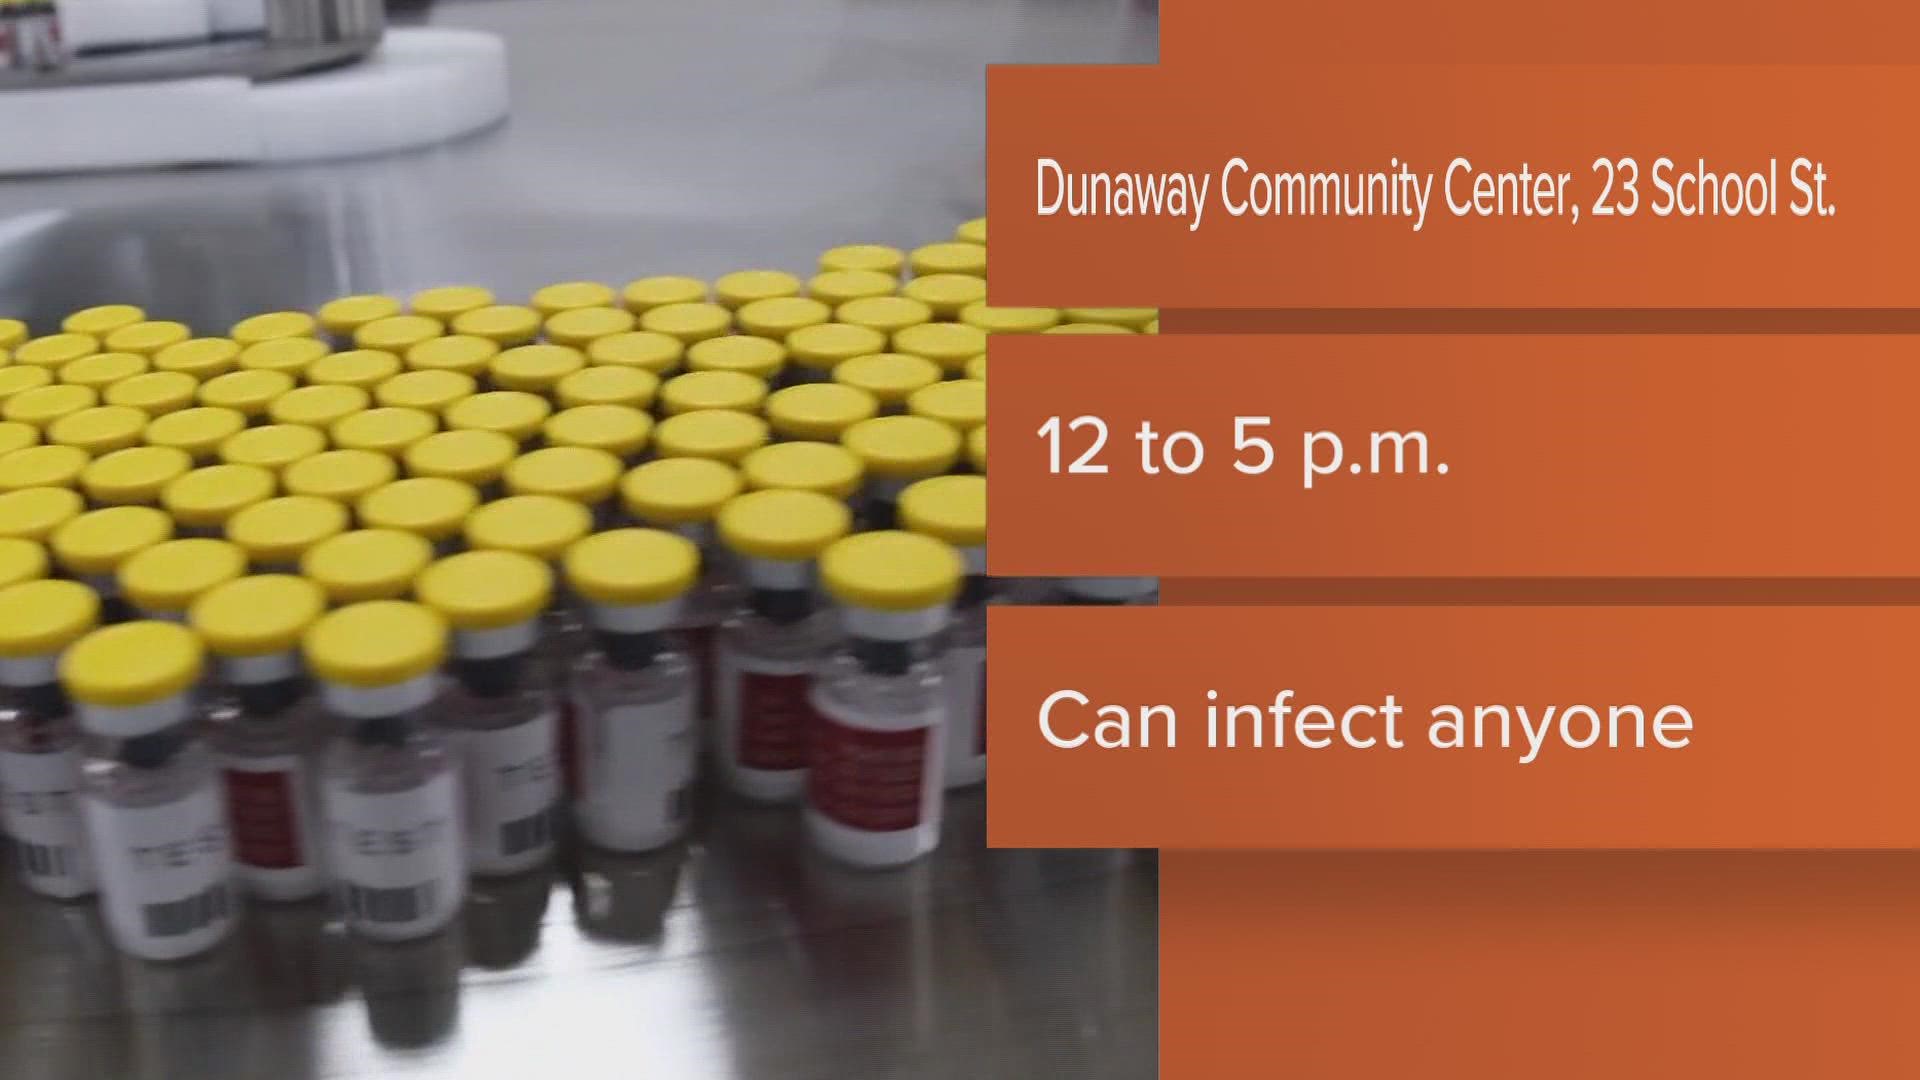 The clinic will be held at the Dunaway Community Center in Ogunquit from noon to 5 p.m.